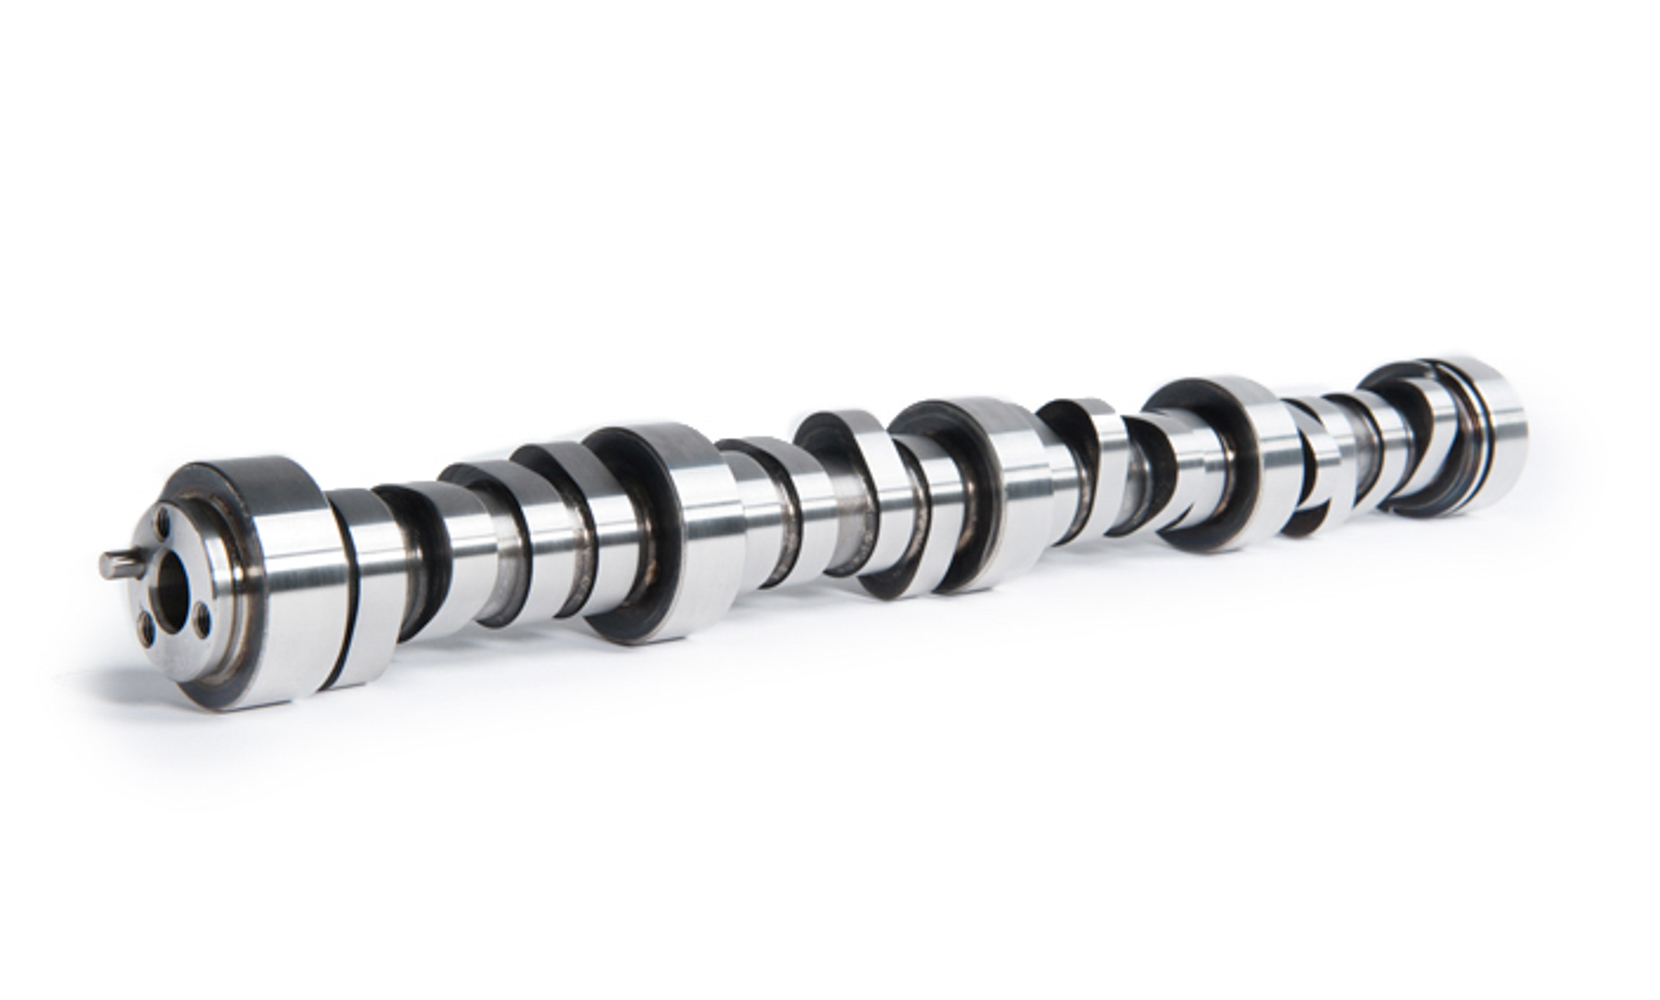 Cam Motion 03-01-0027 Stage 2 LS-Series Hydraulic Roller Camshaft 501 / 501 Lift